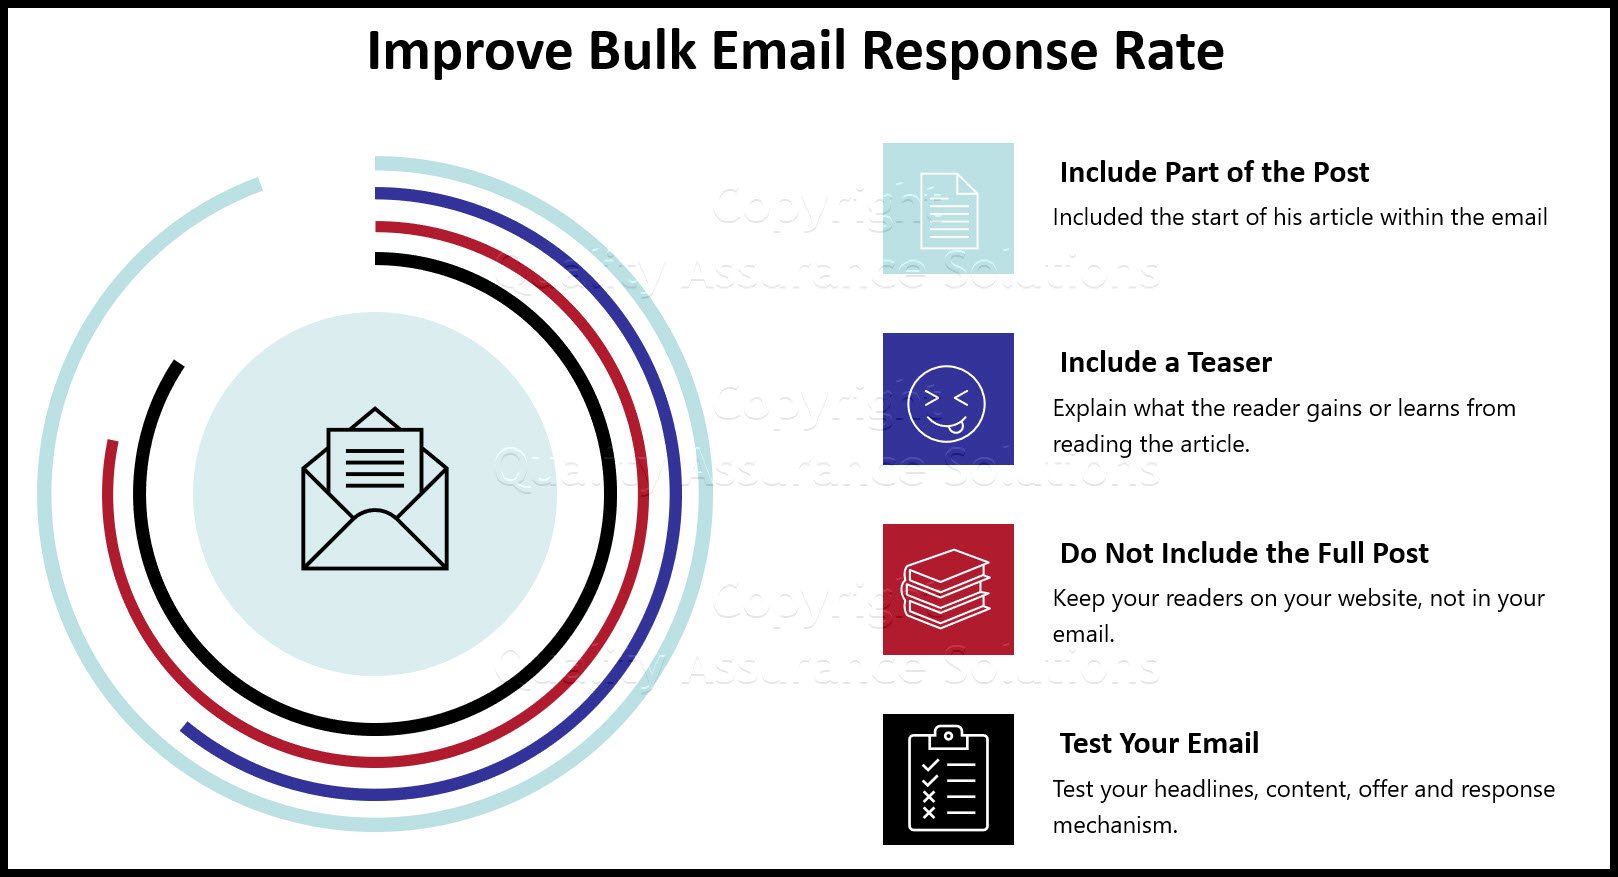 Ideas to improve your bulk email response rate